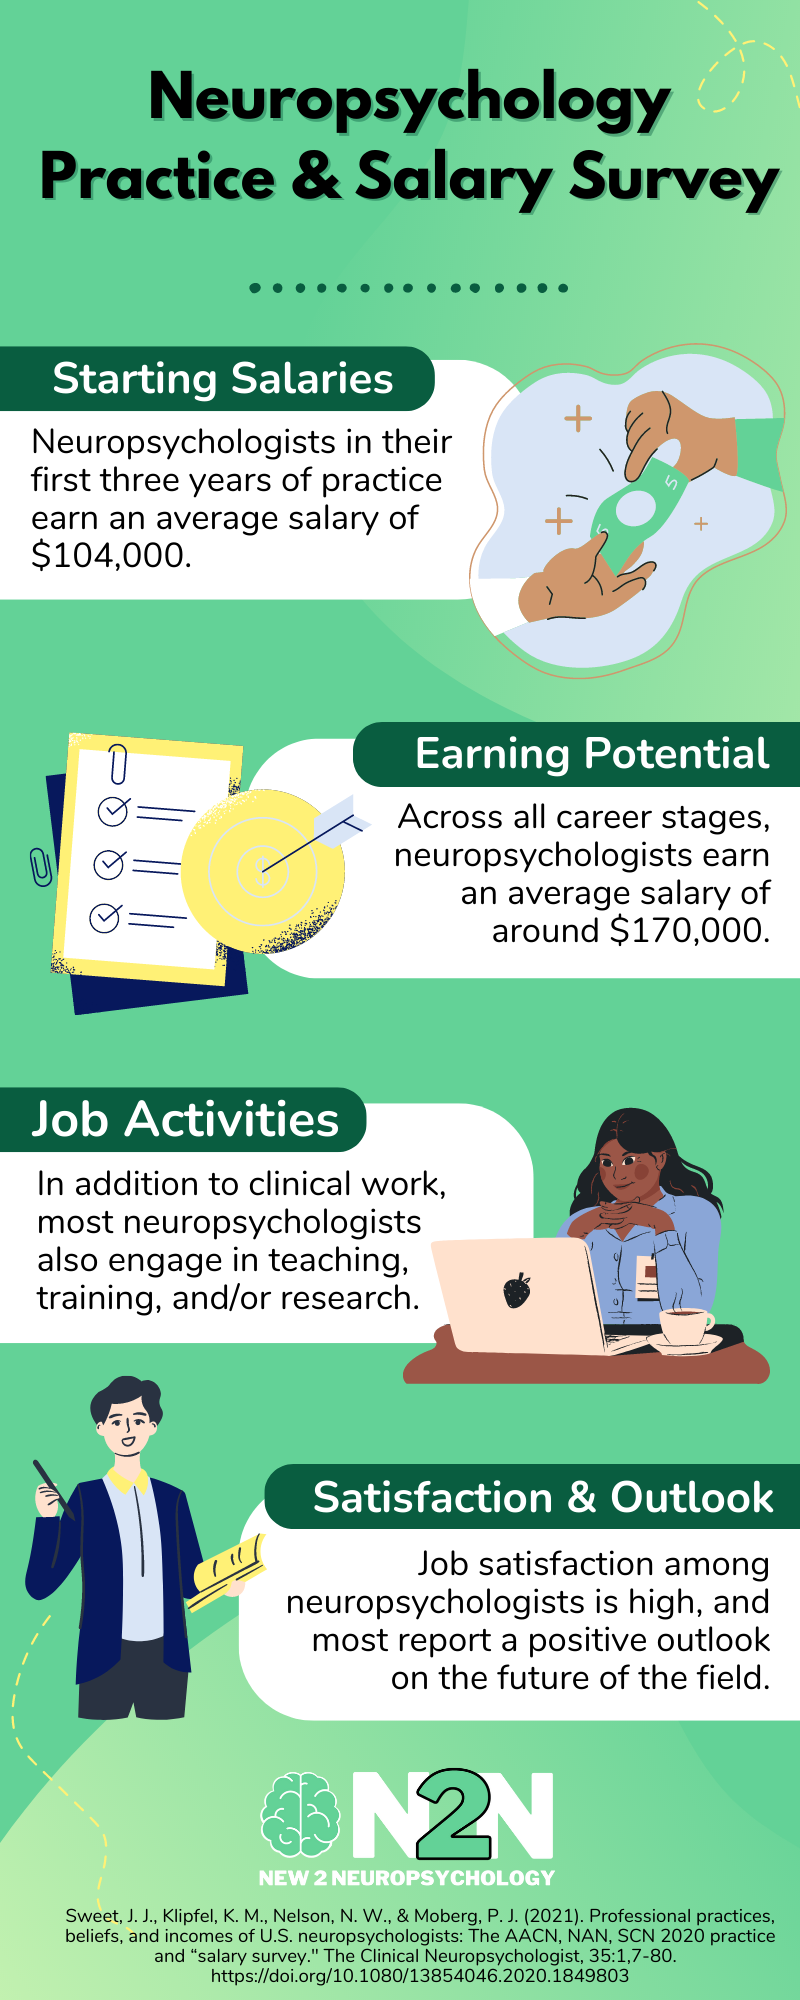 Neuropsychology practice and salary survey. Starting salaries. Neuropsychologists in their first three years of practice earn an average salary of $104,000. Earning potential. Across all career stages, neuropsychologists earn an average salary of around $170,000. Job activities. In addition to clinical work, most neuropsychologists also engage in teaching, training, and/or research. Satisfaction and outlook. Job satisfaction among neuropsychologists is high, and most report a positive outlook on the future of the field. From Sweet, Klipfel, Nelson, & Moberg, 2021. Professional practices, beliefs, and incomes of U.S. neuropsychologists: The AACN, NAN, SCN 2020 practice and salary survey.